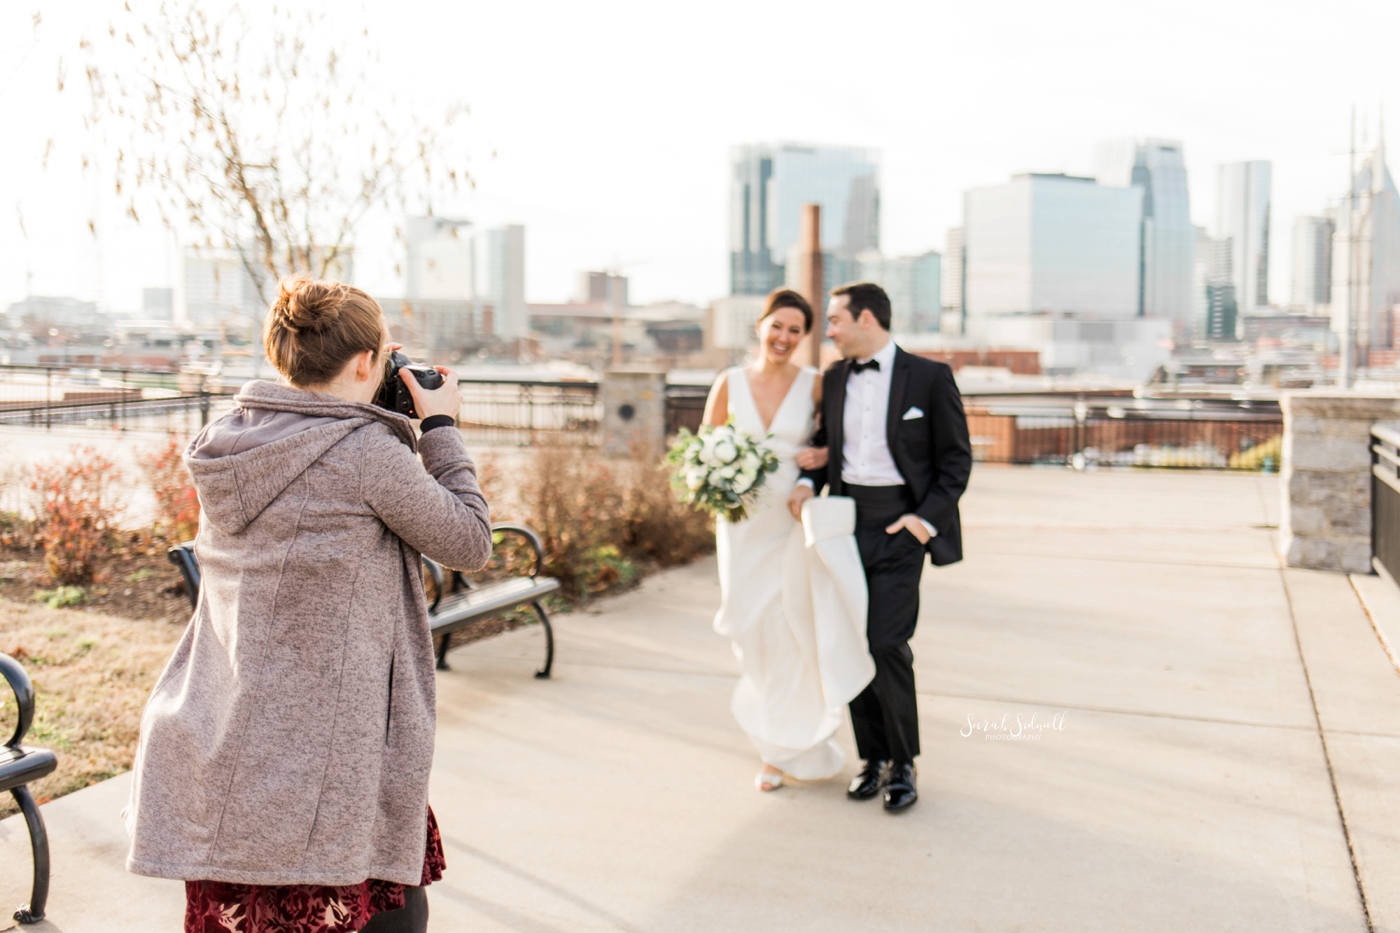 Wedding photography by Sarah Sidwell Photography